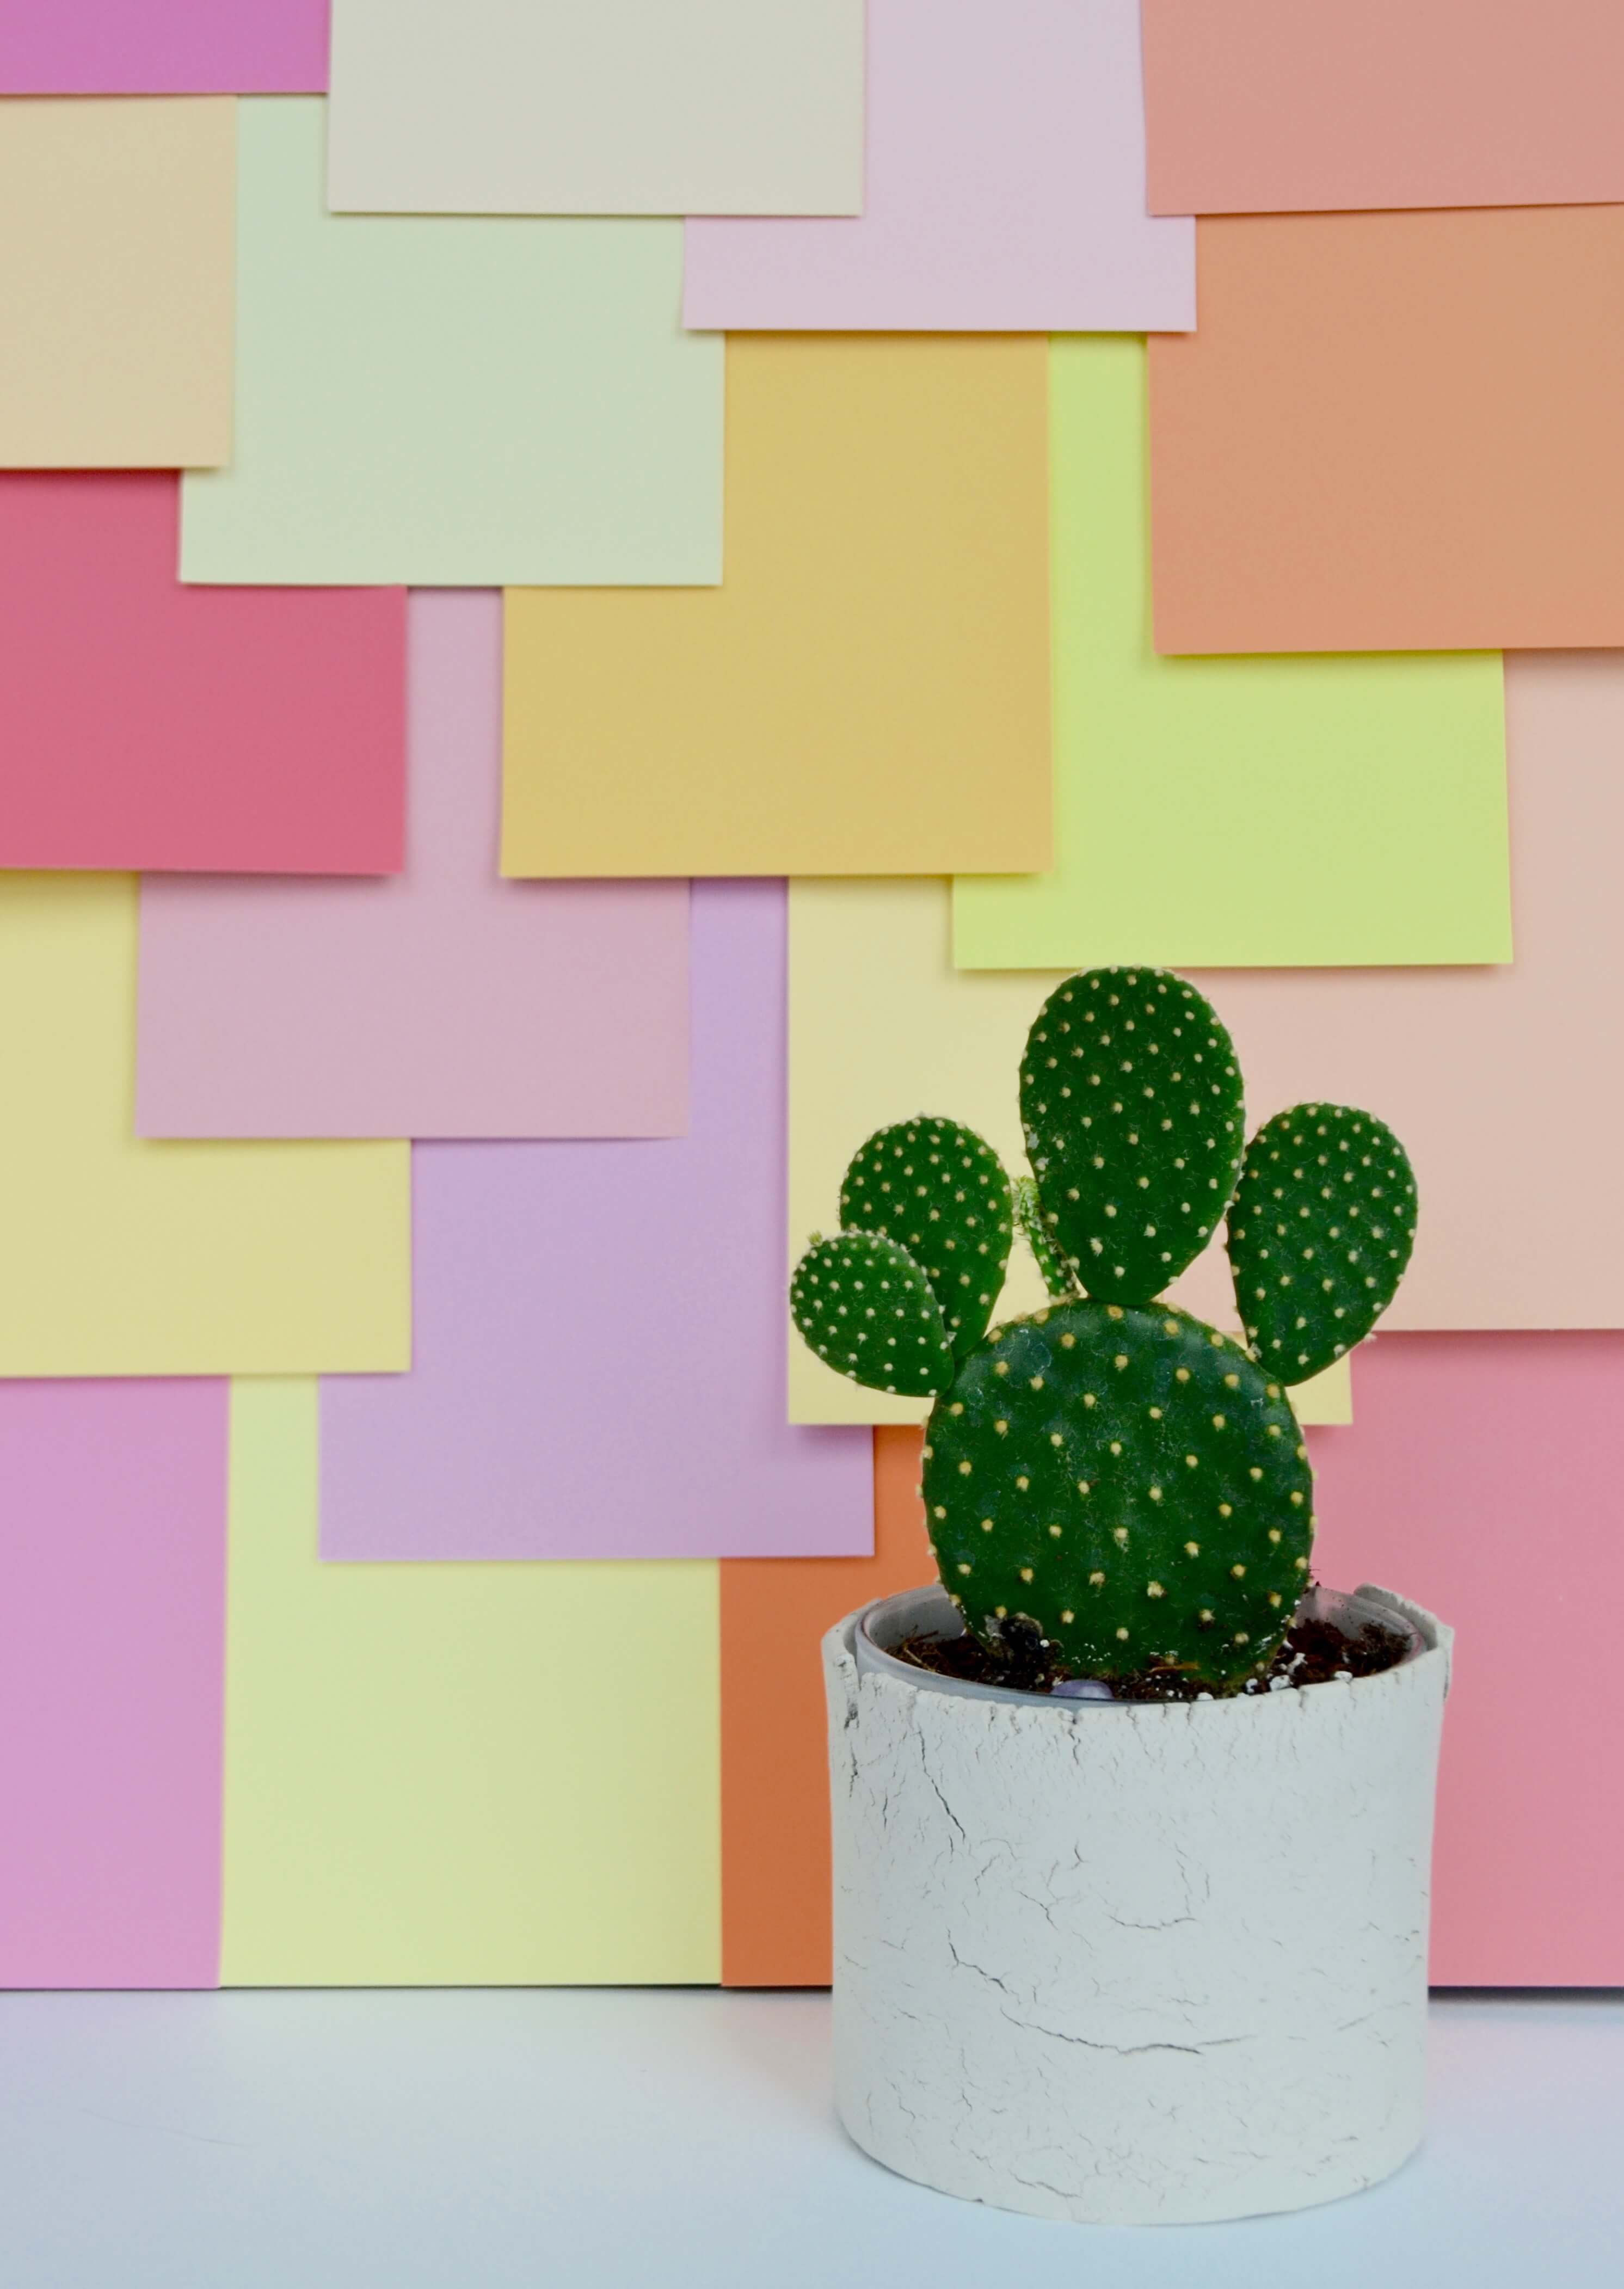 Finished Color Blocked Photo Backdrop with Cactus - Colorful Photo Backdrops